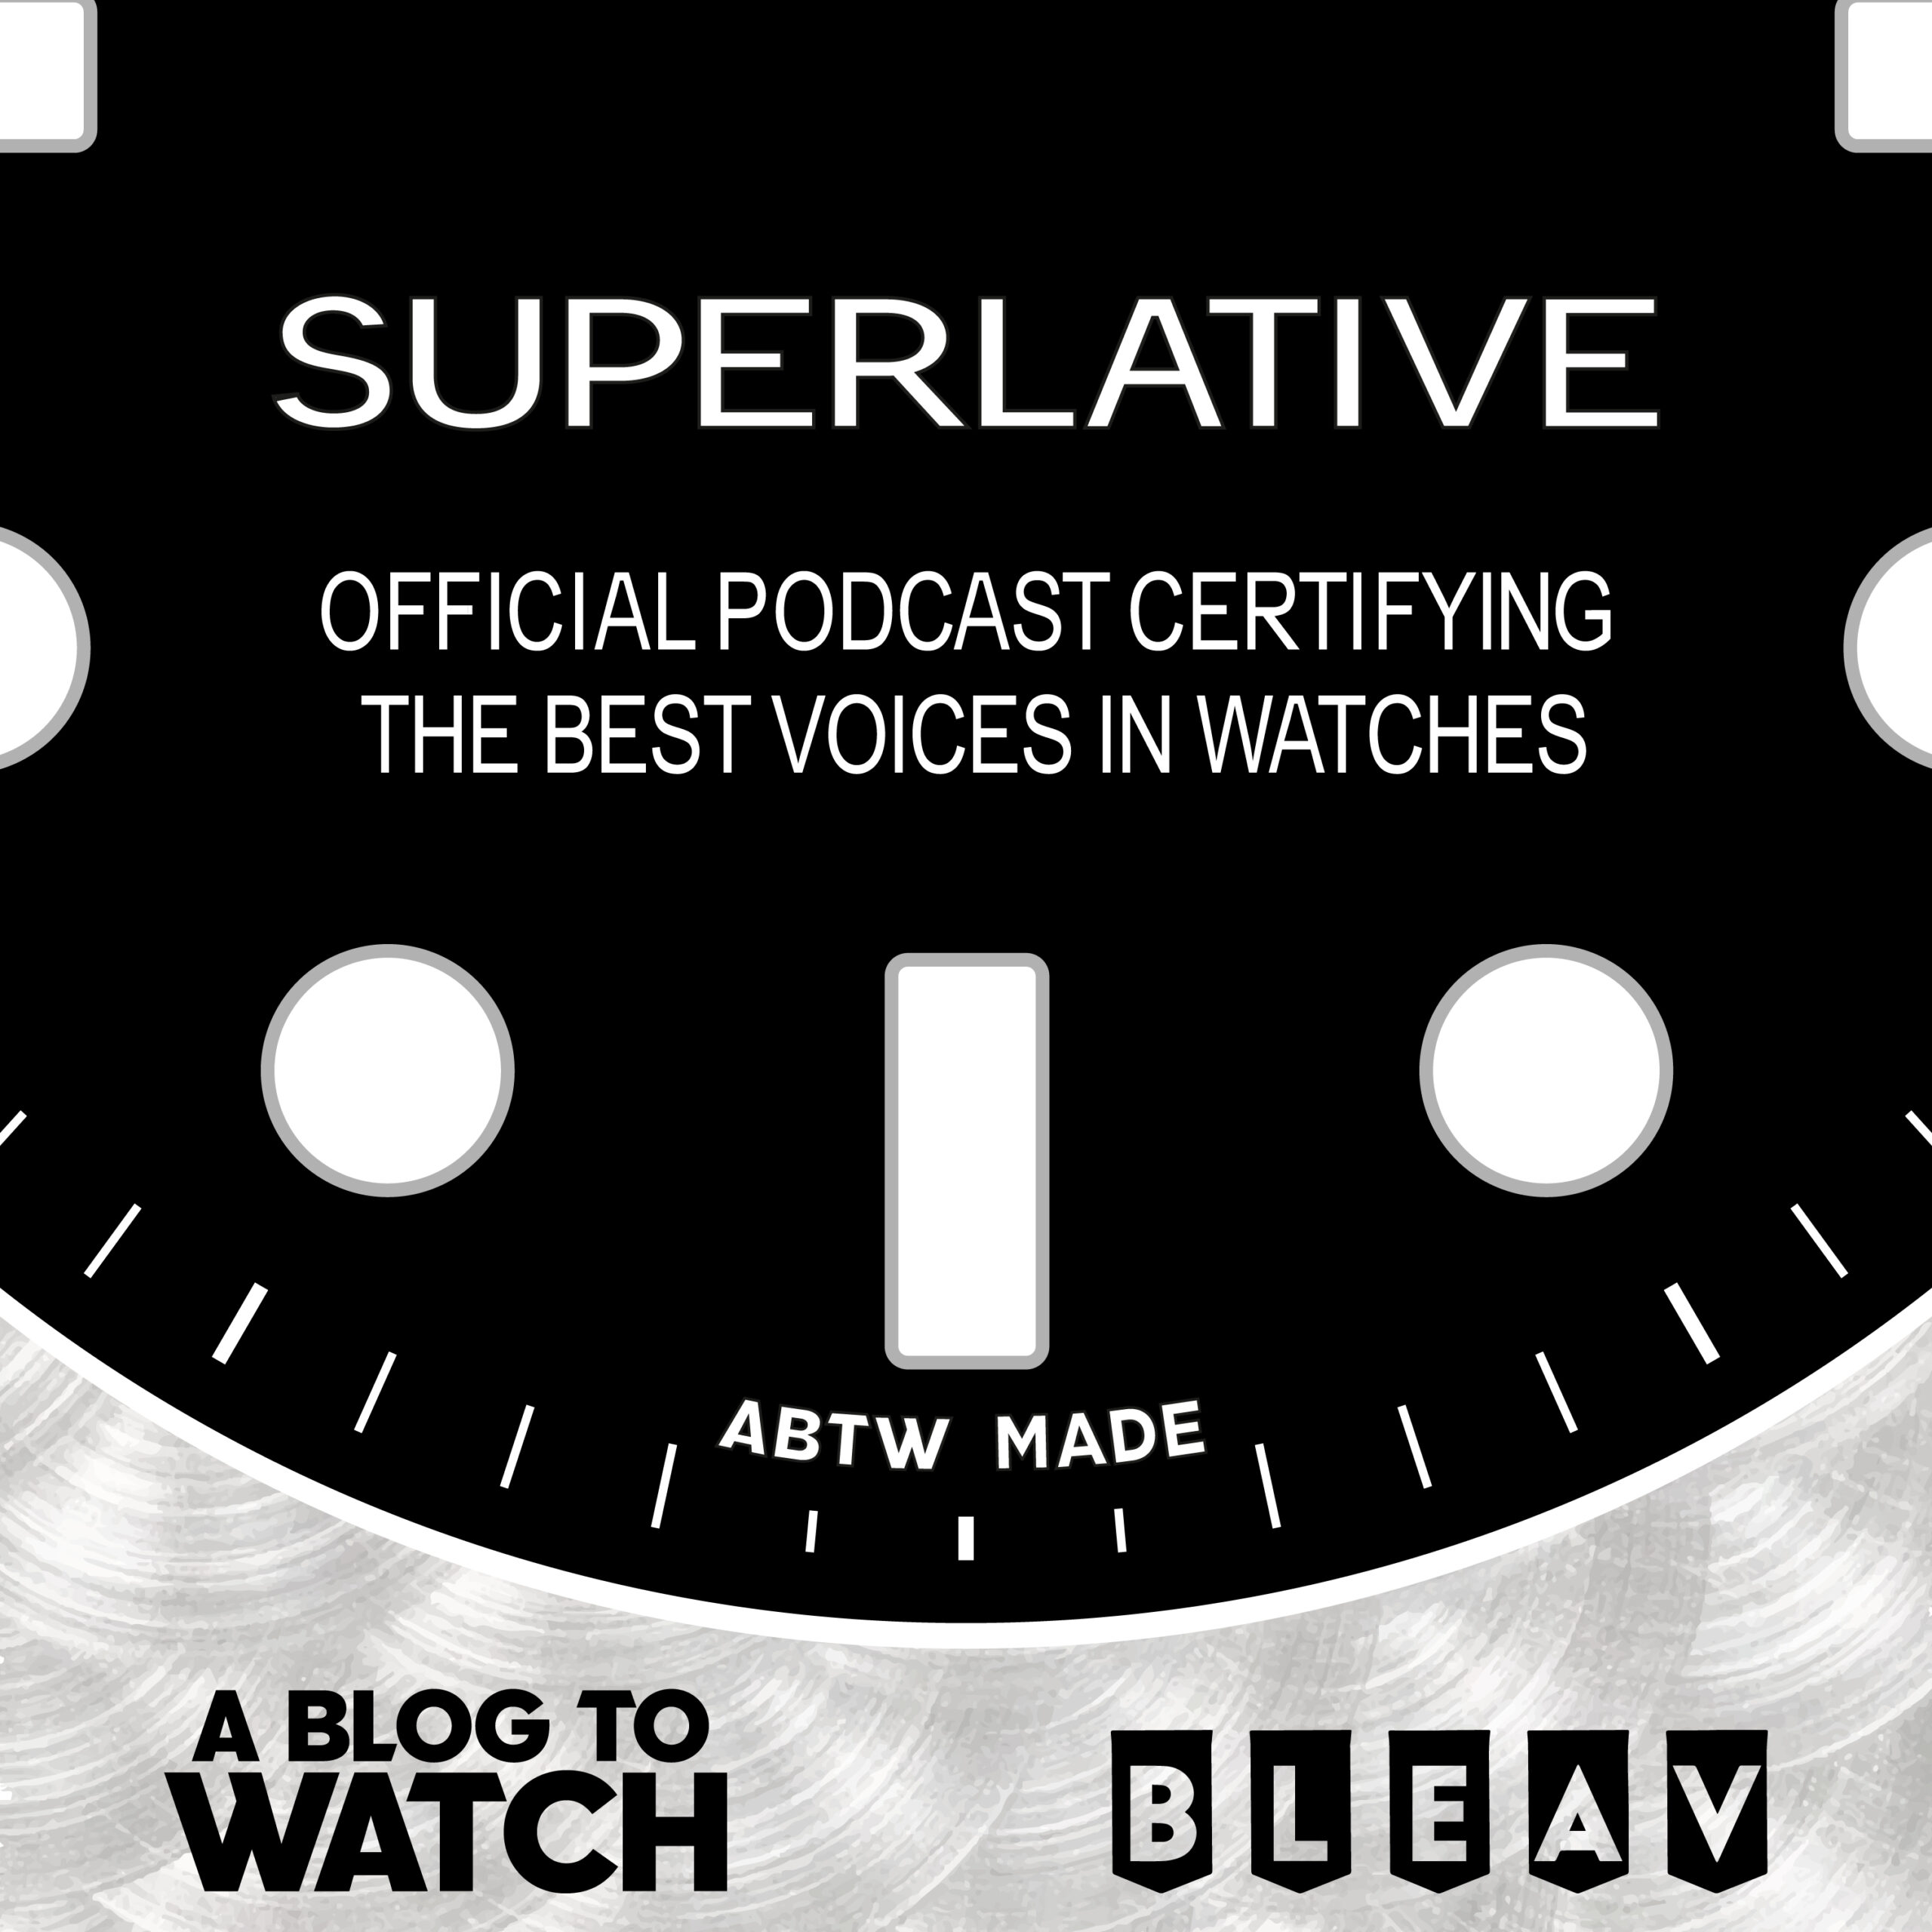 The Smoking Tire’s Matt Farah, And Deep-Dives With CEOs From IWC, Tissot, Parmigiani On The SUPERLATIVE Podcast